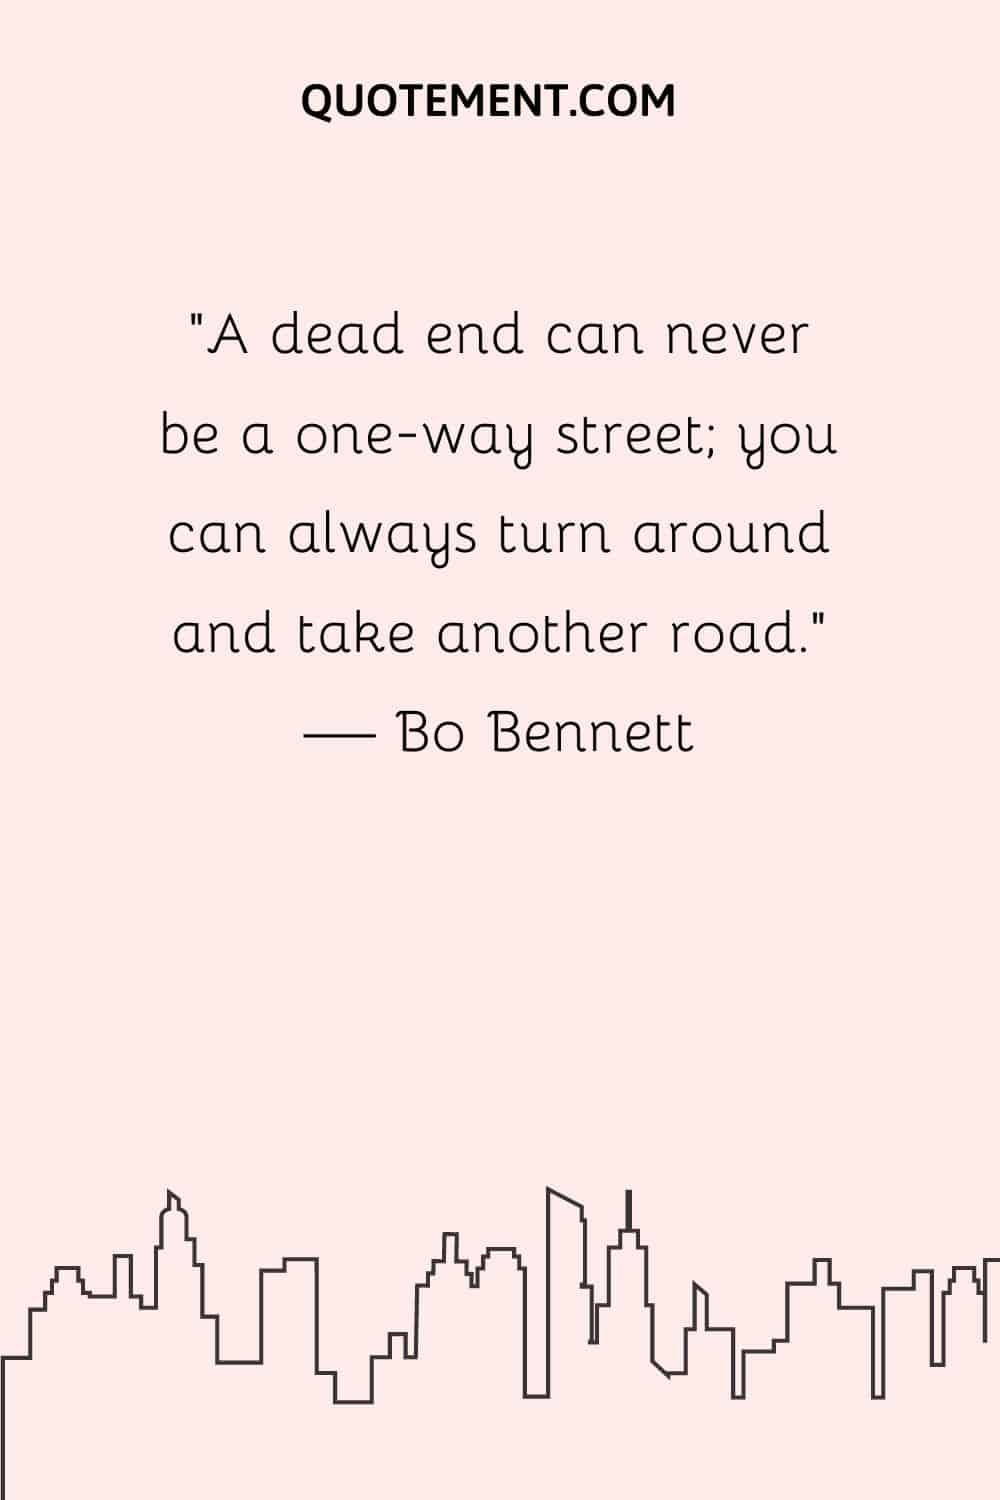 A dead end can never be a one-way street